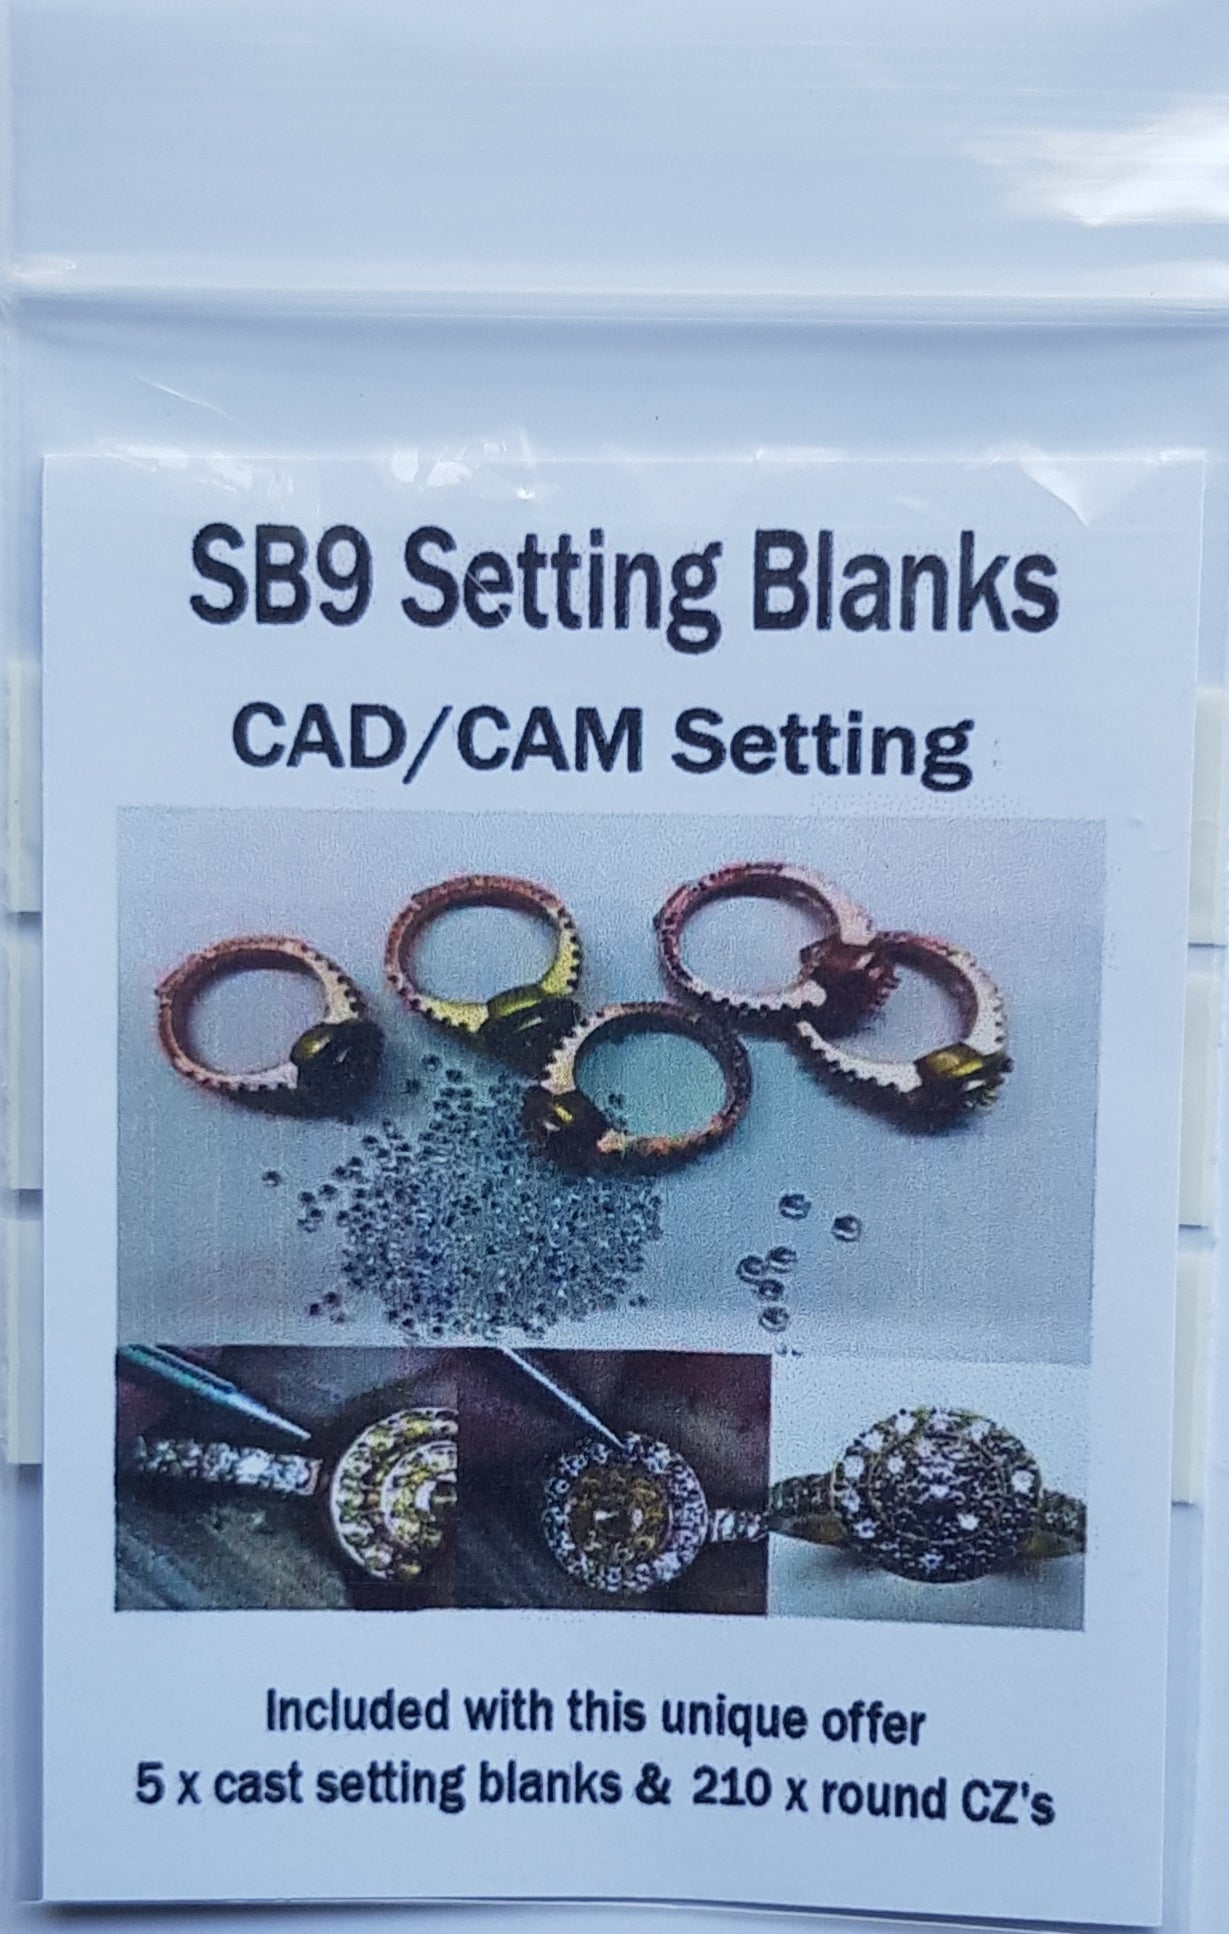 CAD/CAM Setting blanks (25% Off)